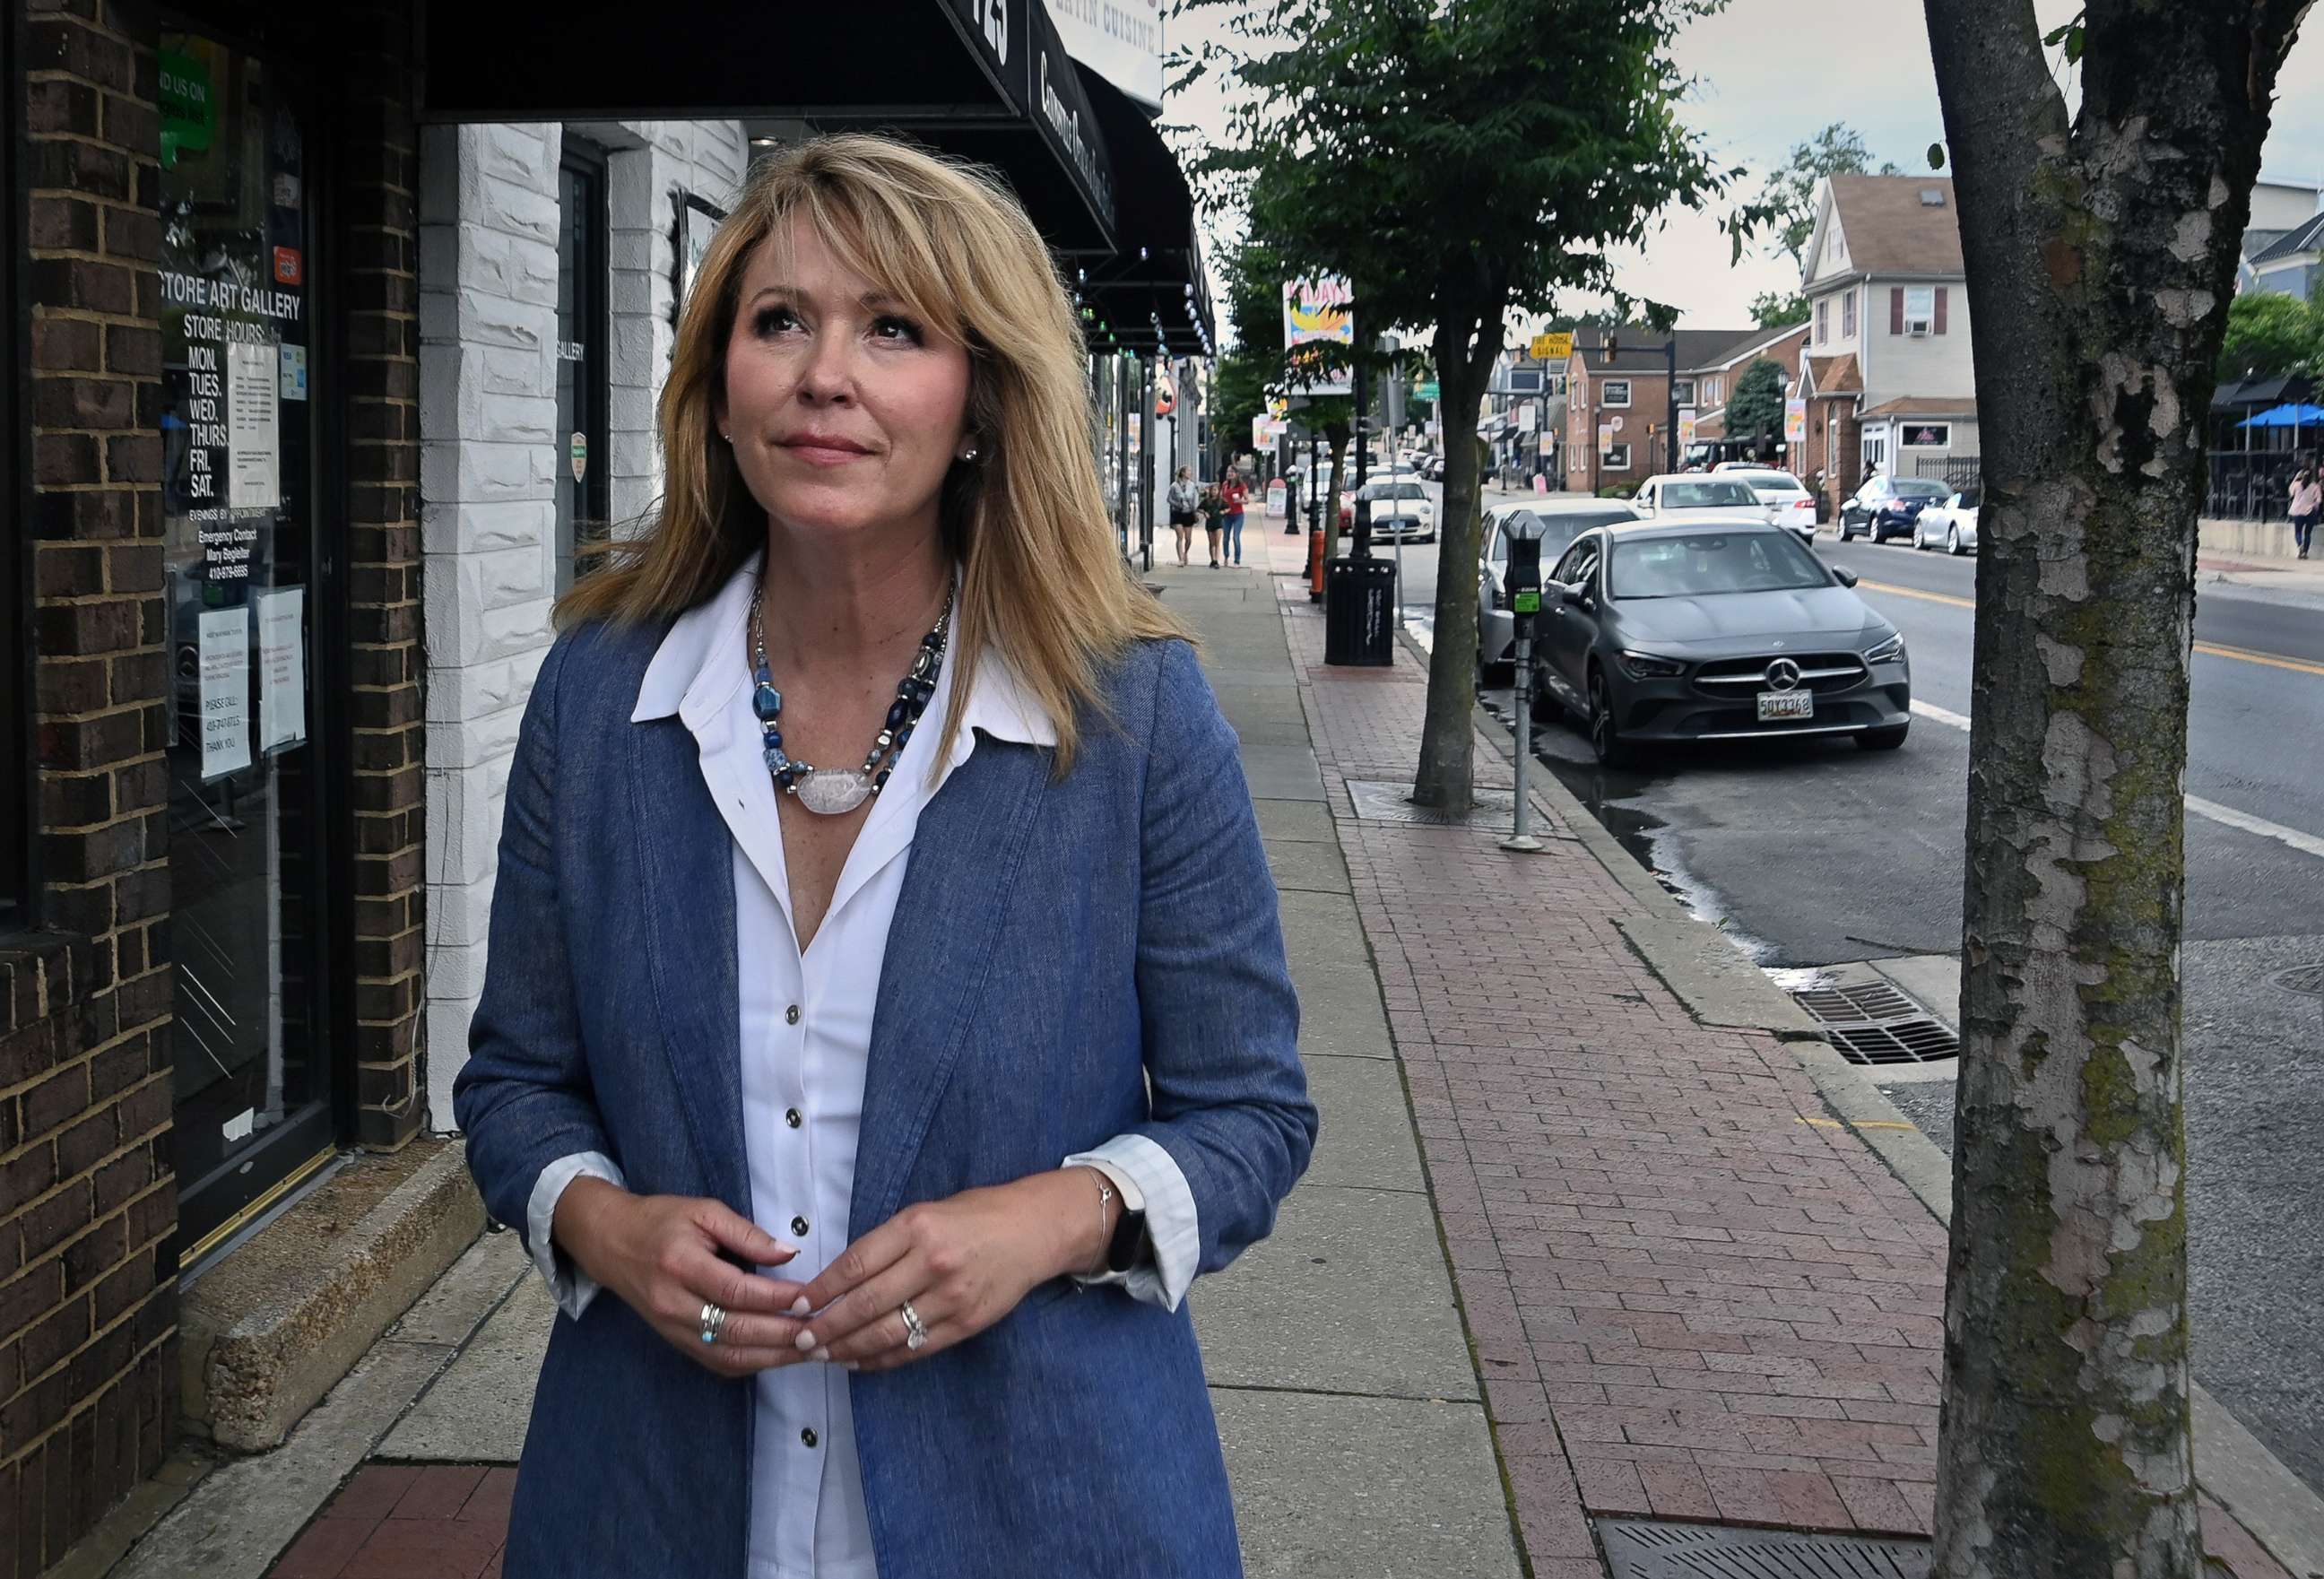 PHOTO: Republican gubernatorial candidate Kelly Schulz walked the downtown area hoping to chat with locals as she campaigned in Catonsville, Md., June 09, 2022. 